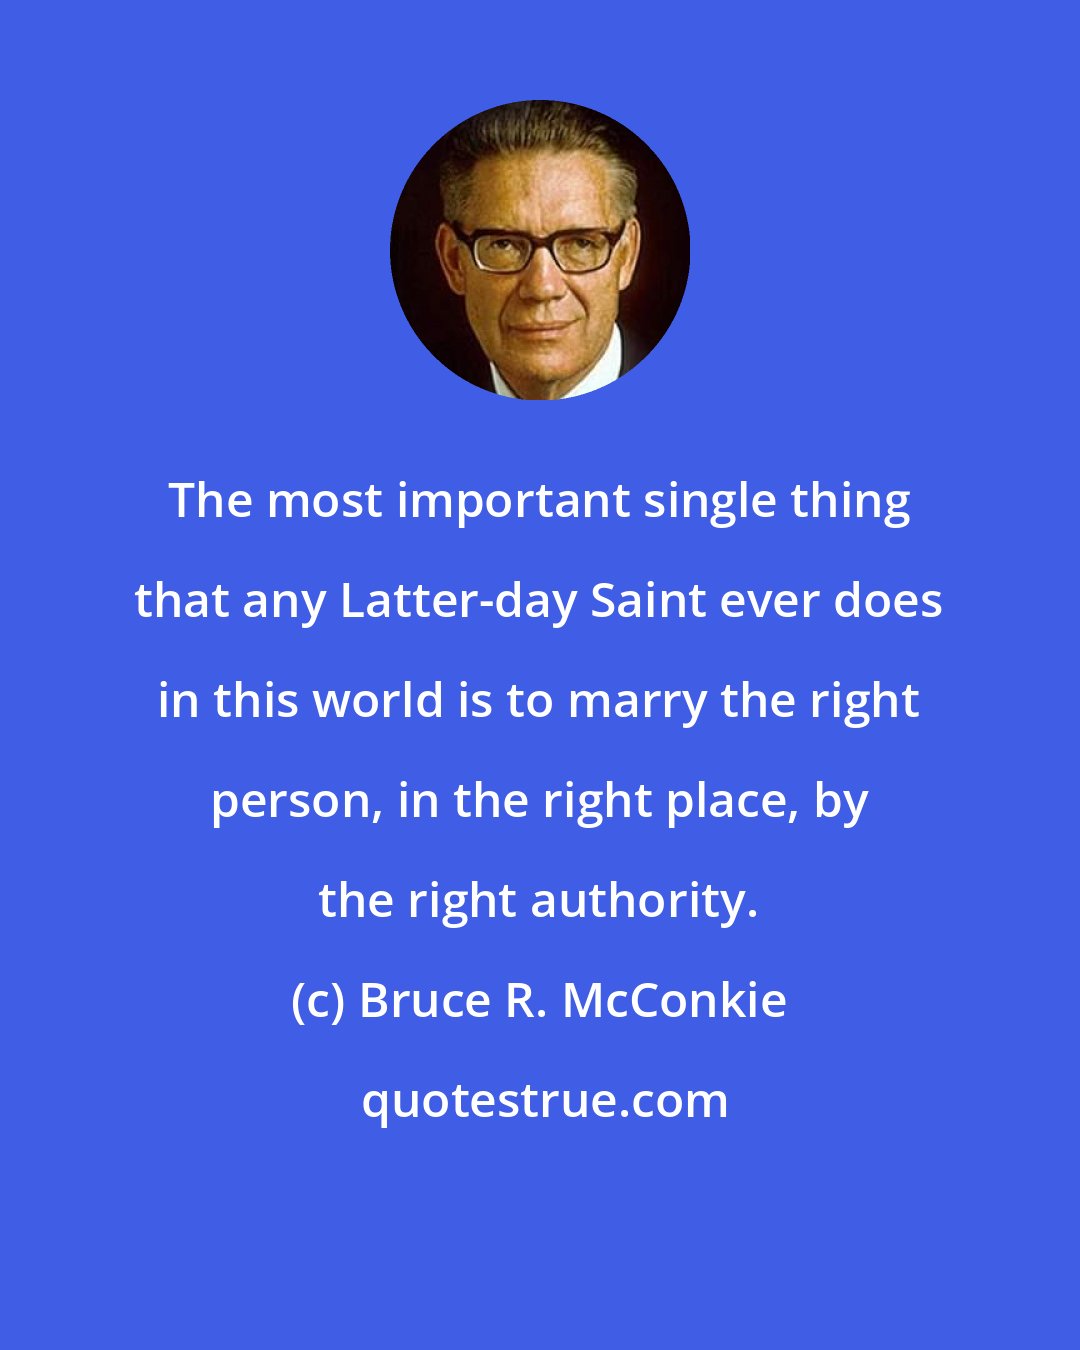 Bruce R. McConkie: The most important single thing that any Latter-day Saint ever does in this world is to marry the right person, in the right place, by the right authority.